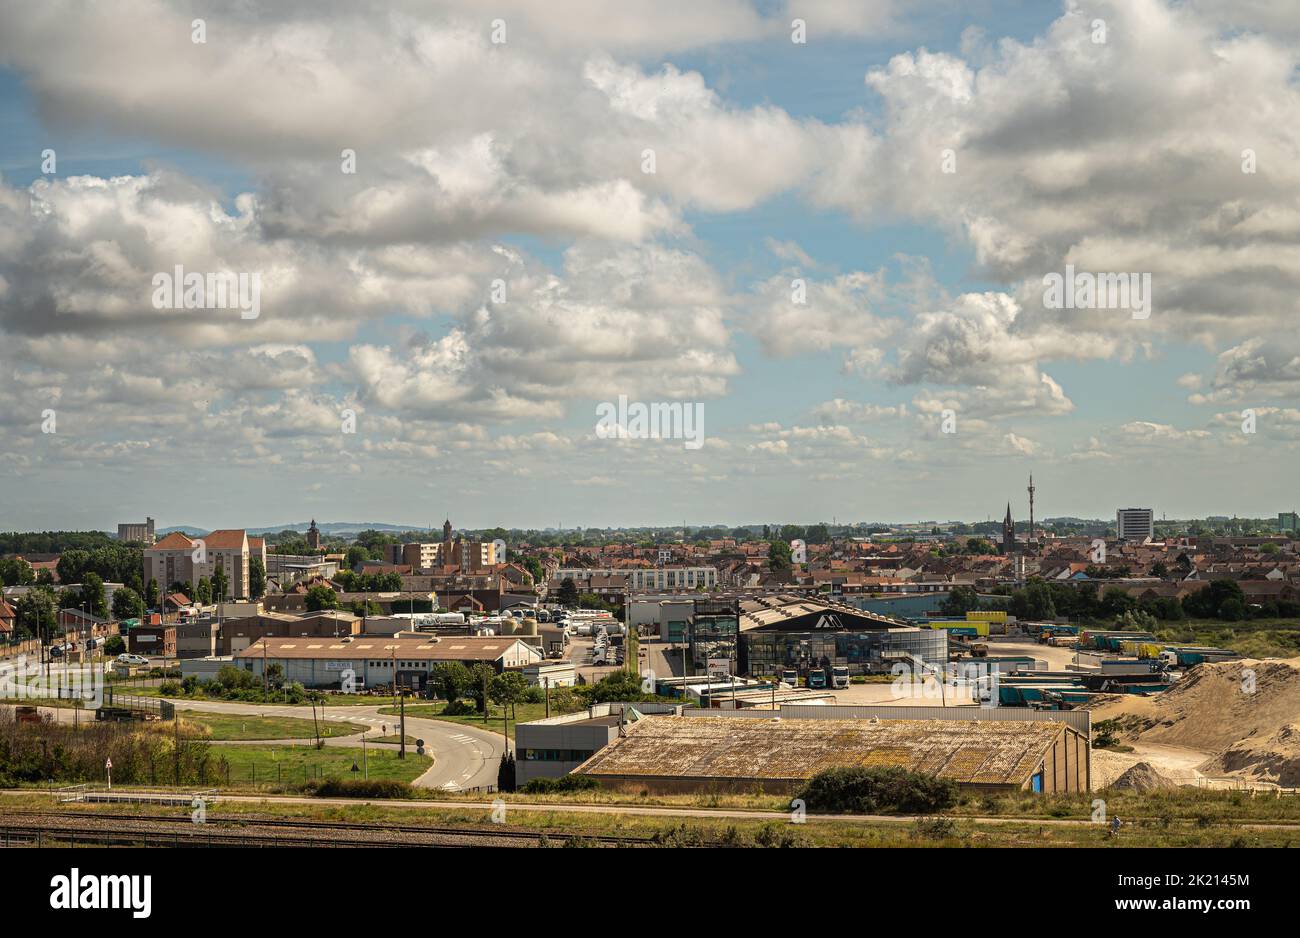 Europe, France, Dunkerque - July 9, 2022: Port scenery. Mauffrey Flandres Maritime offices, transport company with storage facilities. City skyline on Stock Photo